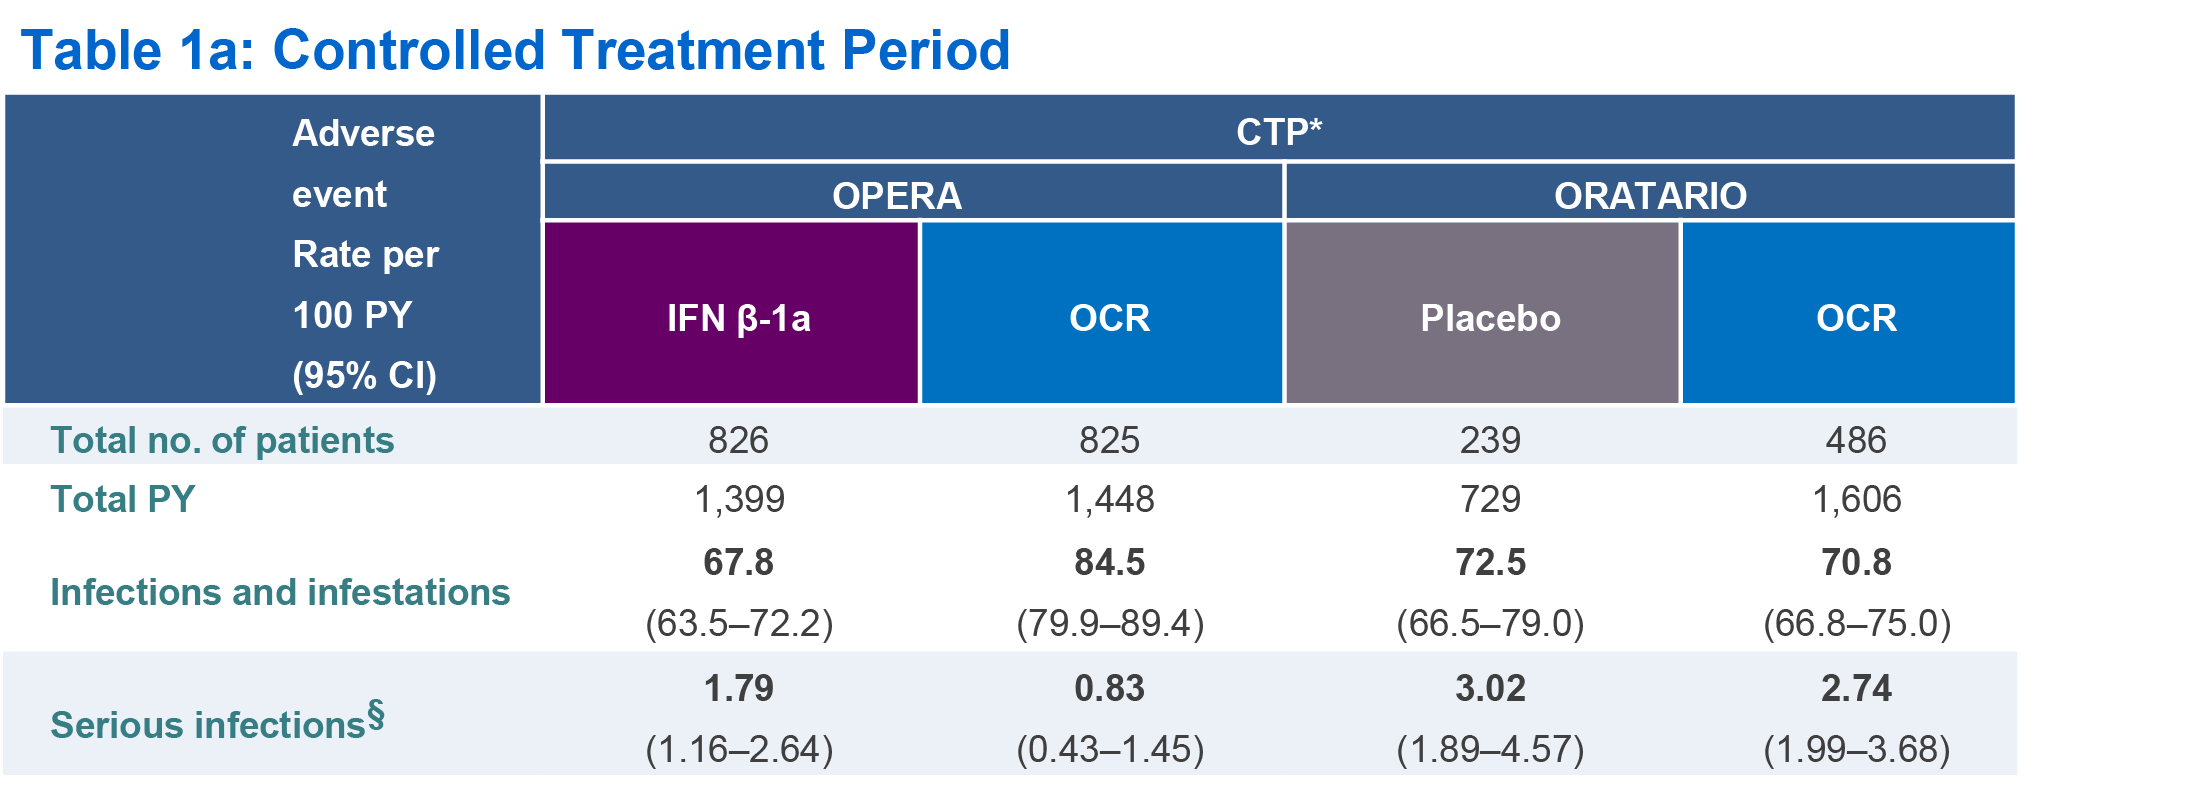 Table 1a: Controlled Treatment Period